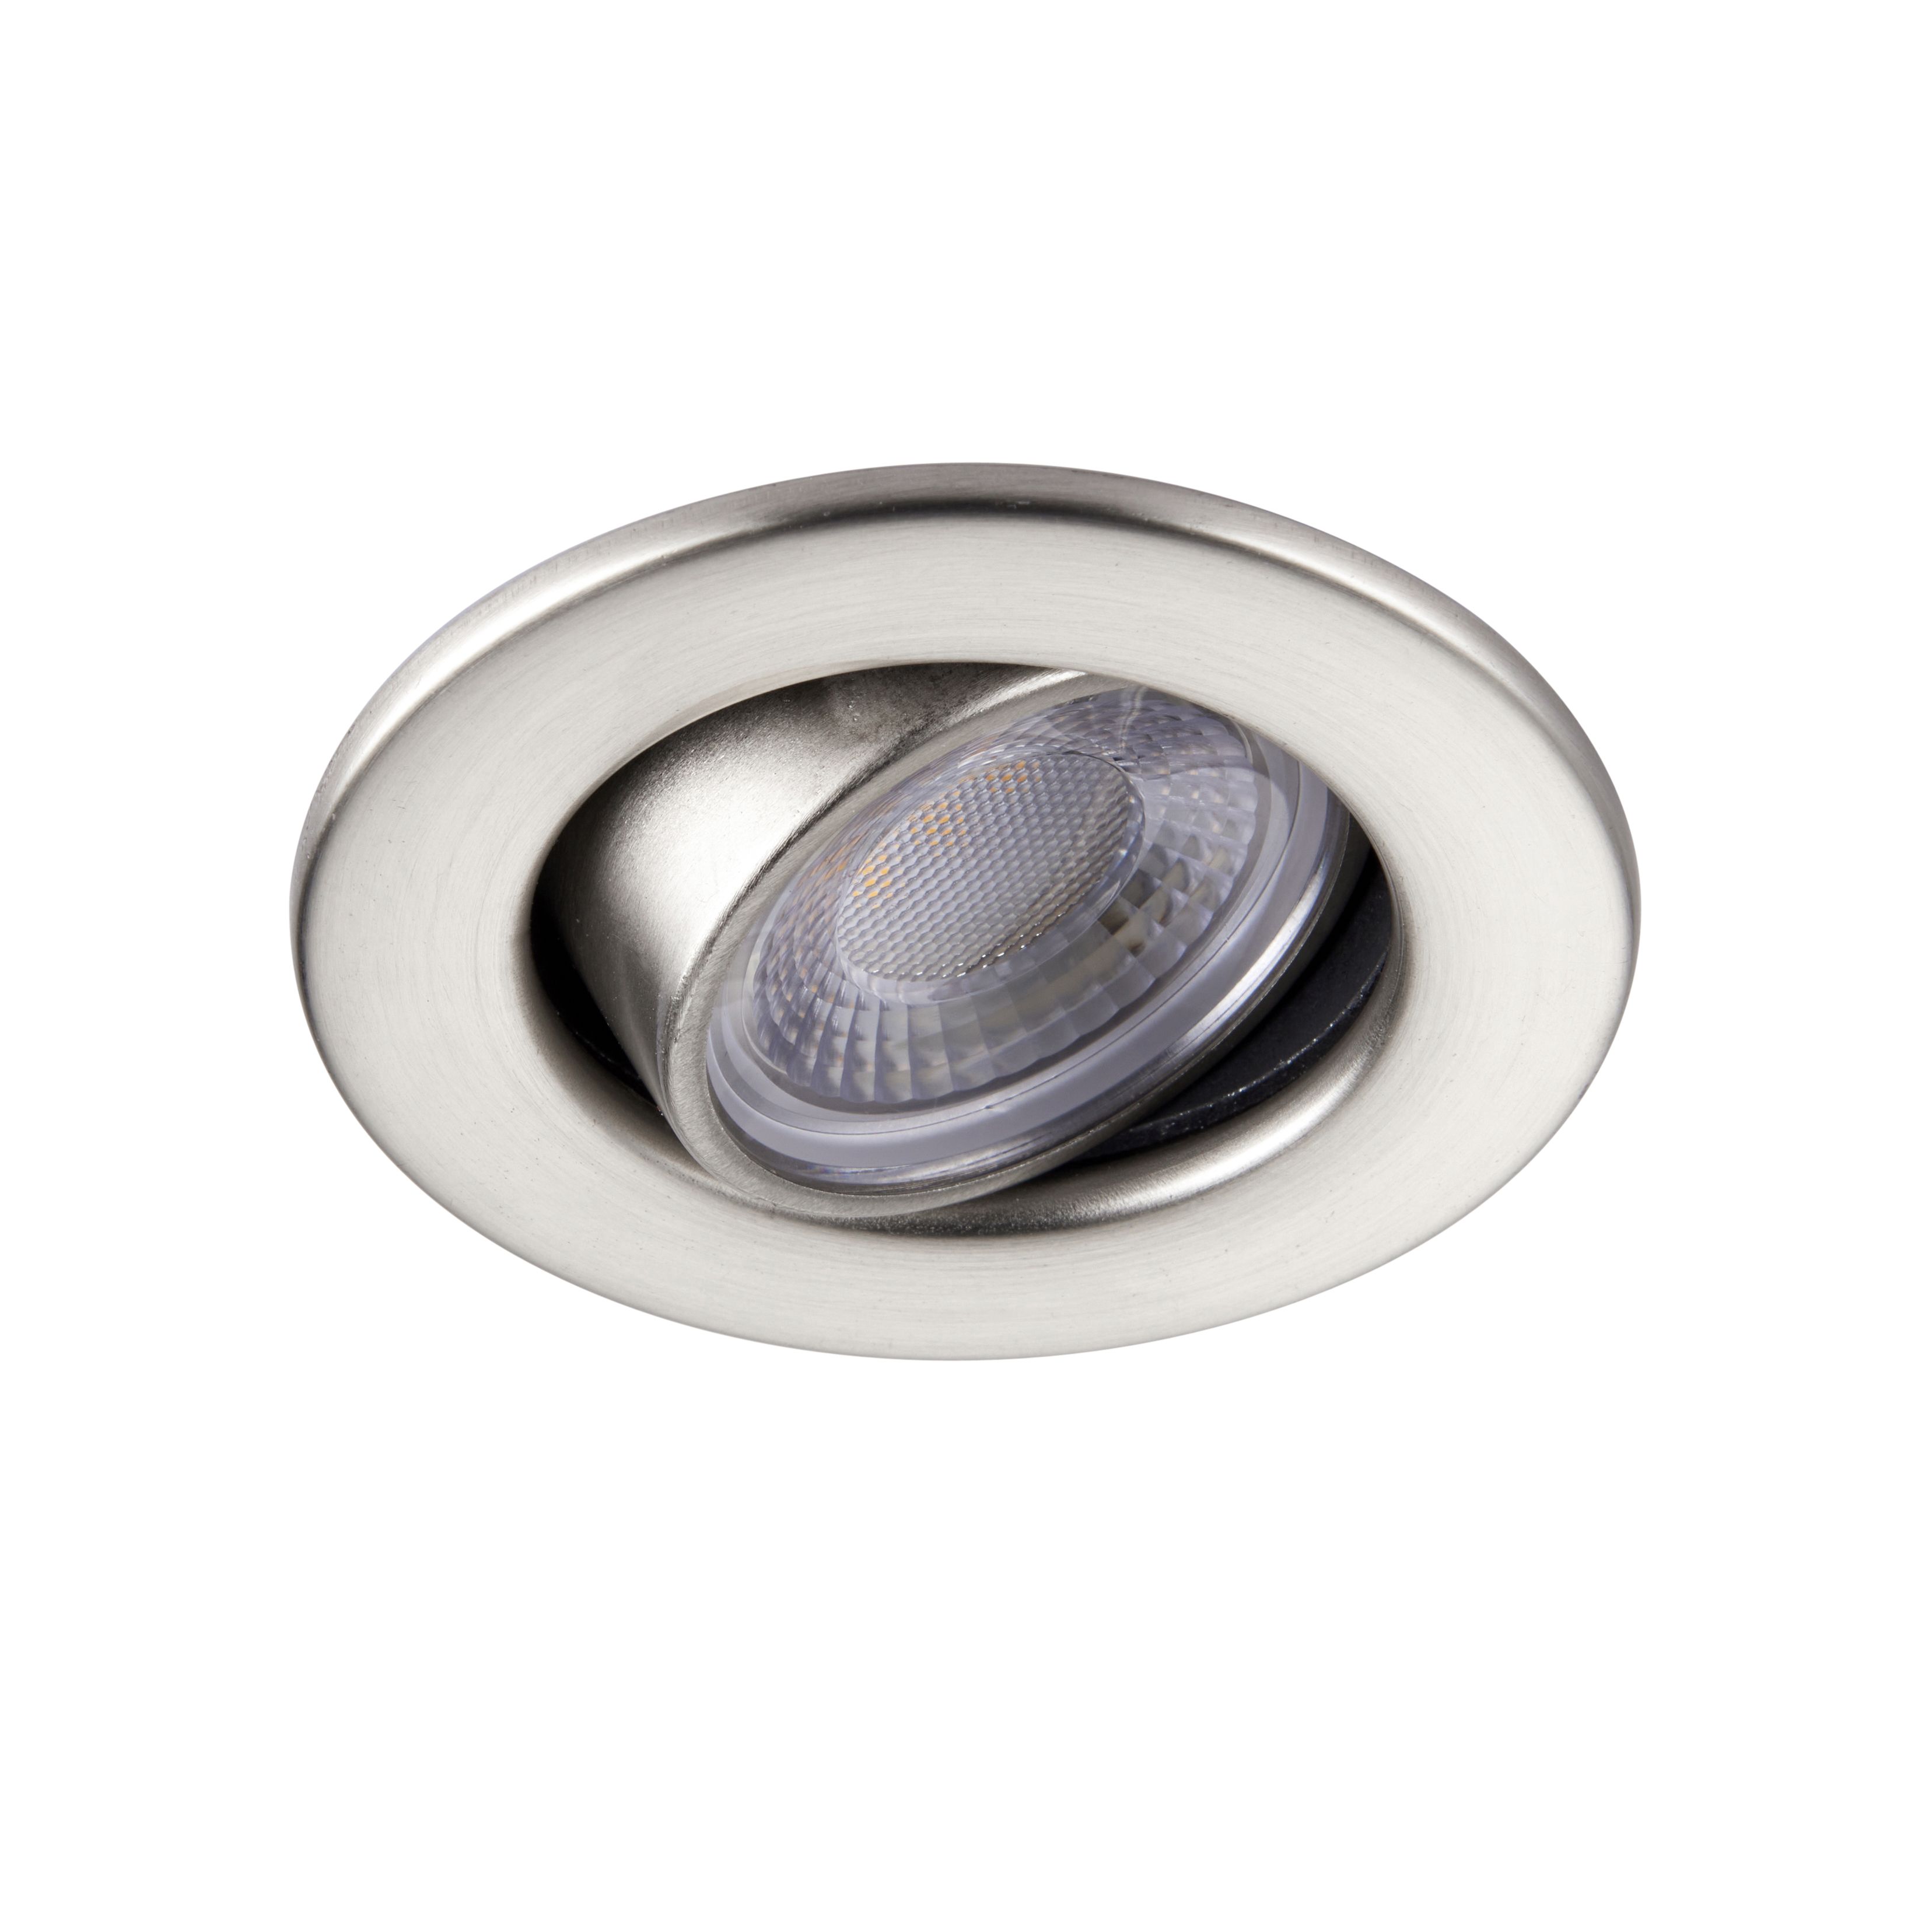 GuardECO Nickel effect Adjustable LED Cool white Downlight 6W IP20